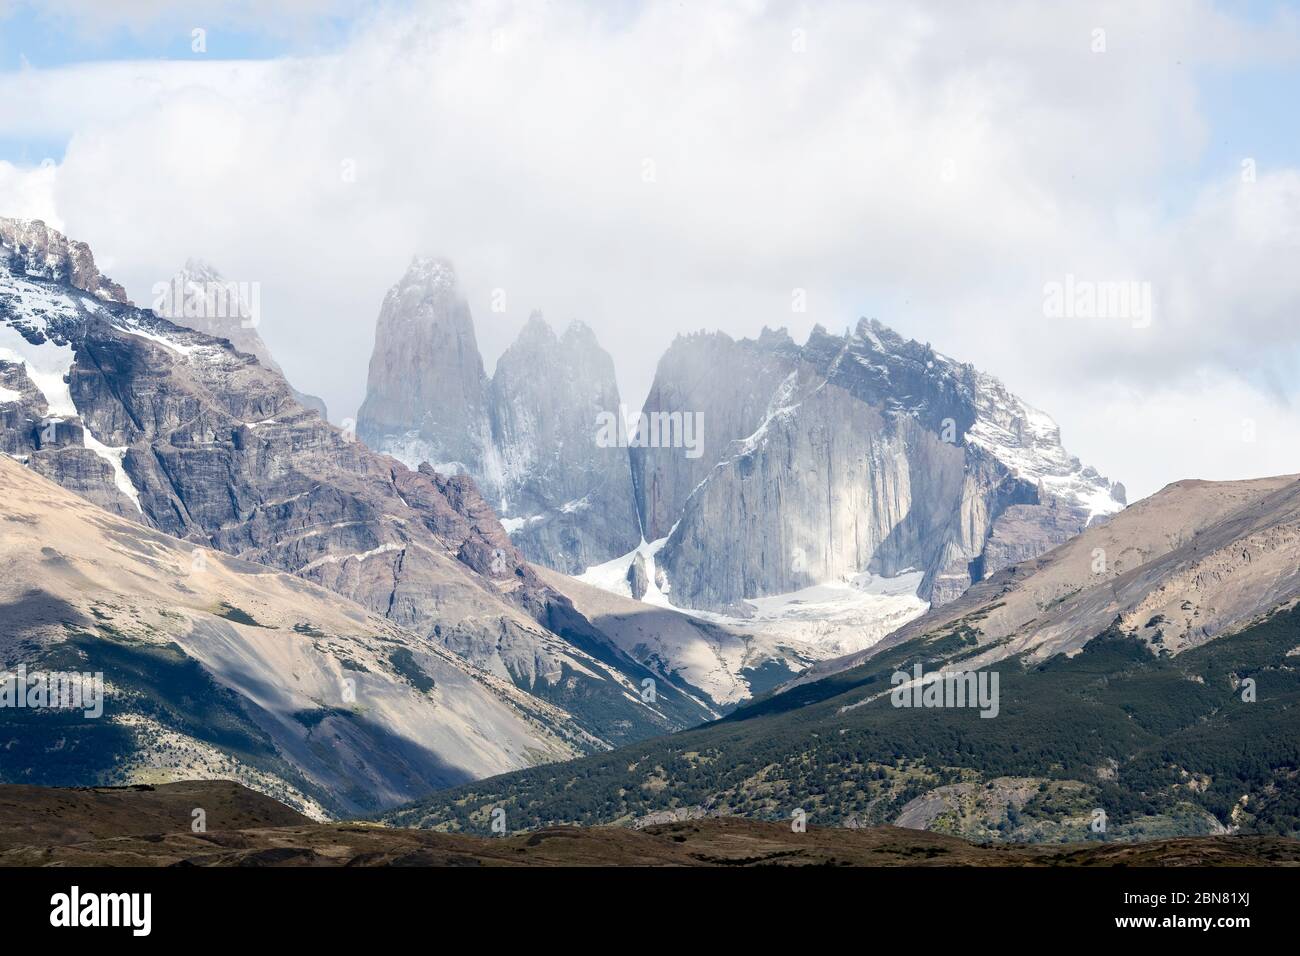 The Cordillera Paine mountain range with the three Torres del Paine. (North, or Torres Monzino, tower to the right.) Stock Photo